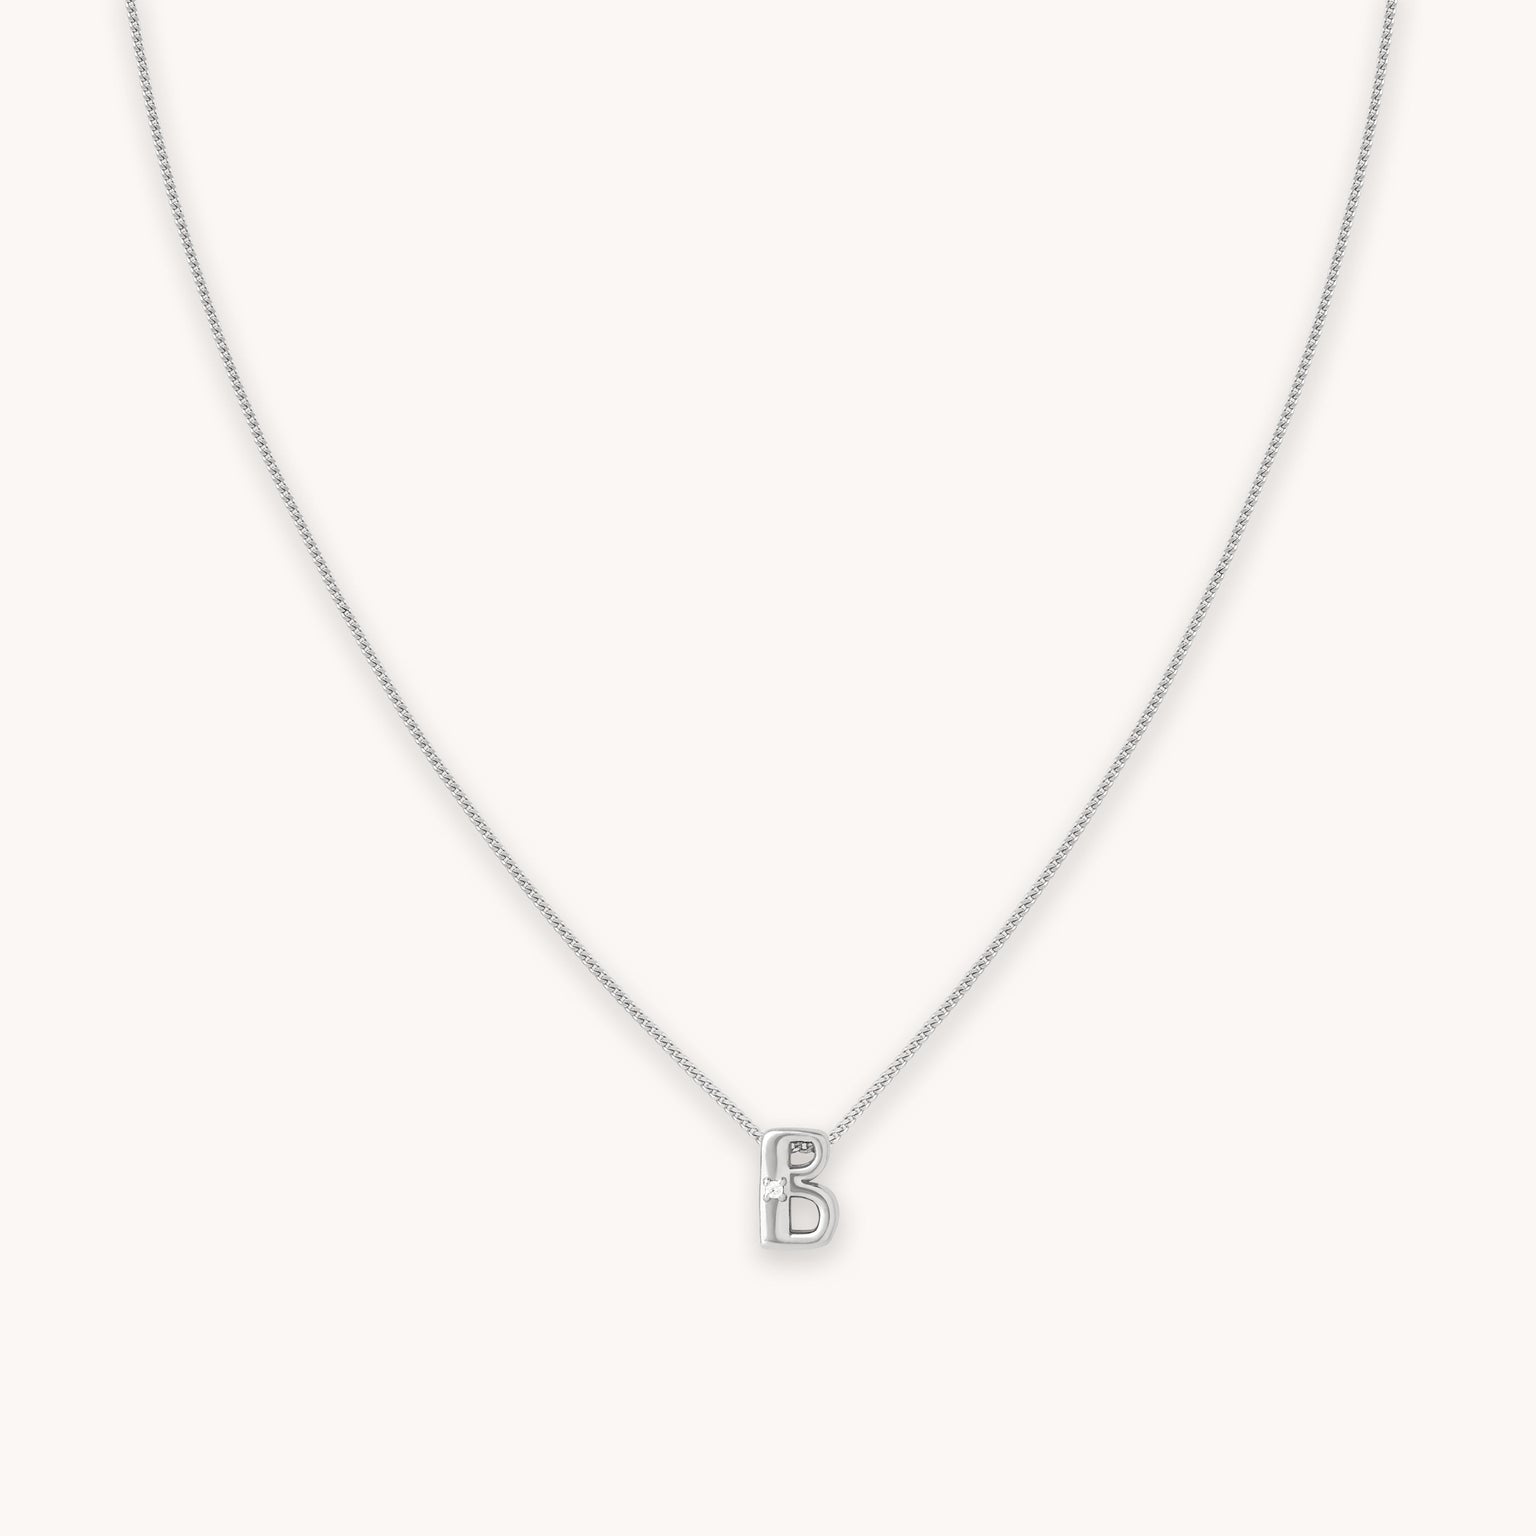 B Initial Pendant Necklace in Silver